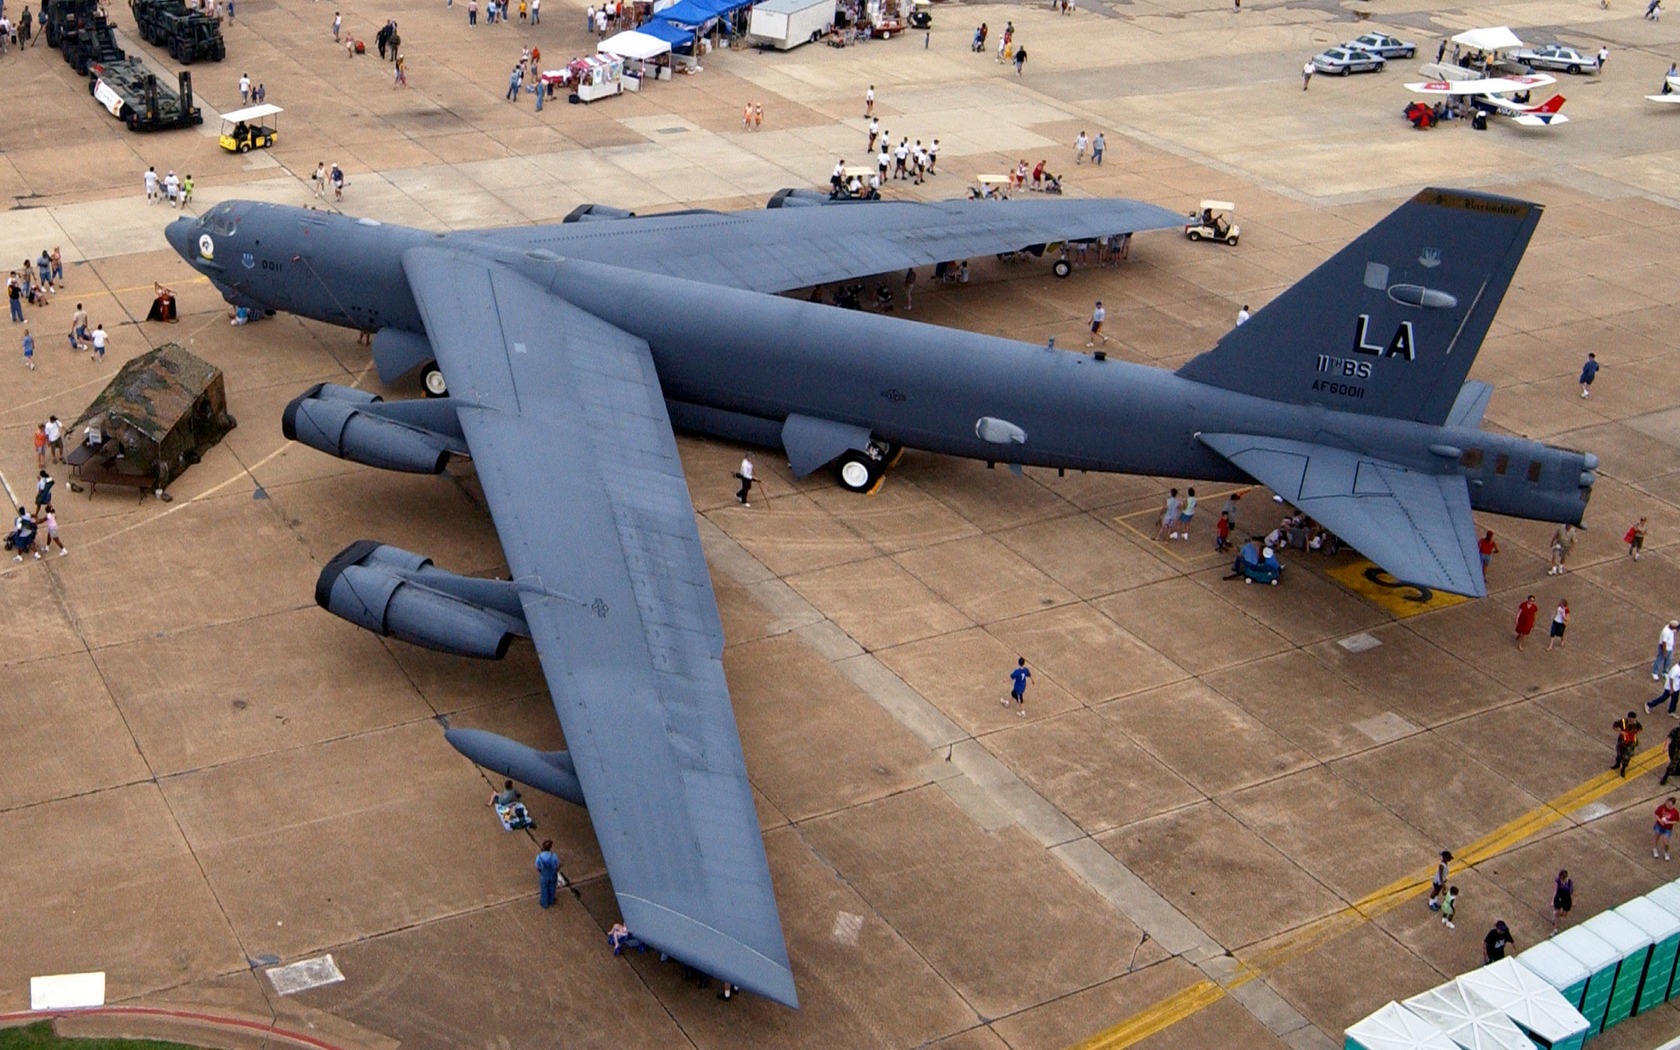 Download High quality B-52 Grounded At Air Show Military Airplanes wallpaper / 1680x1050